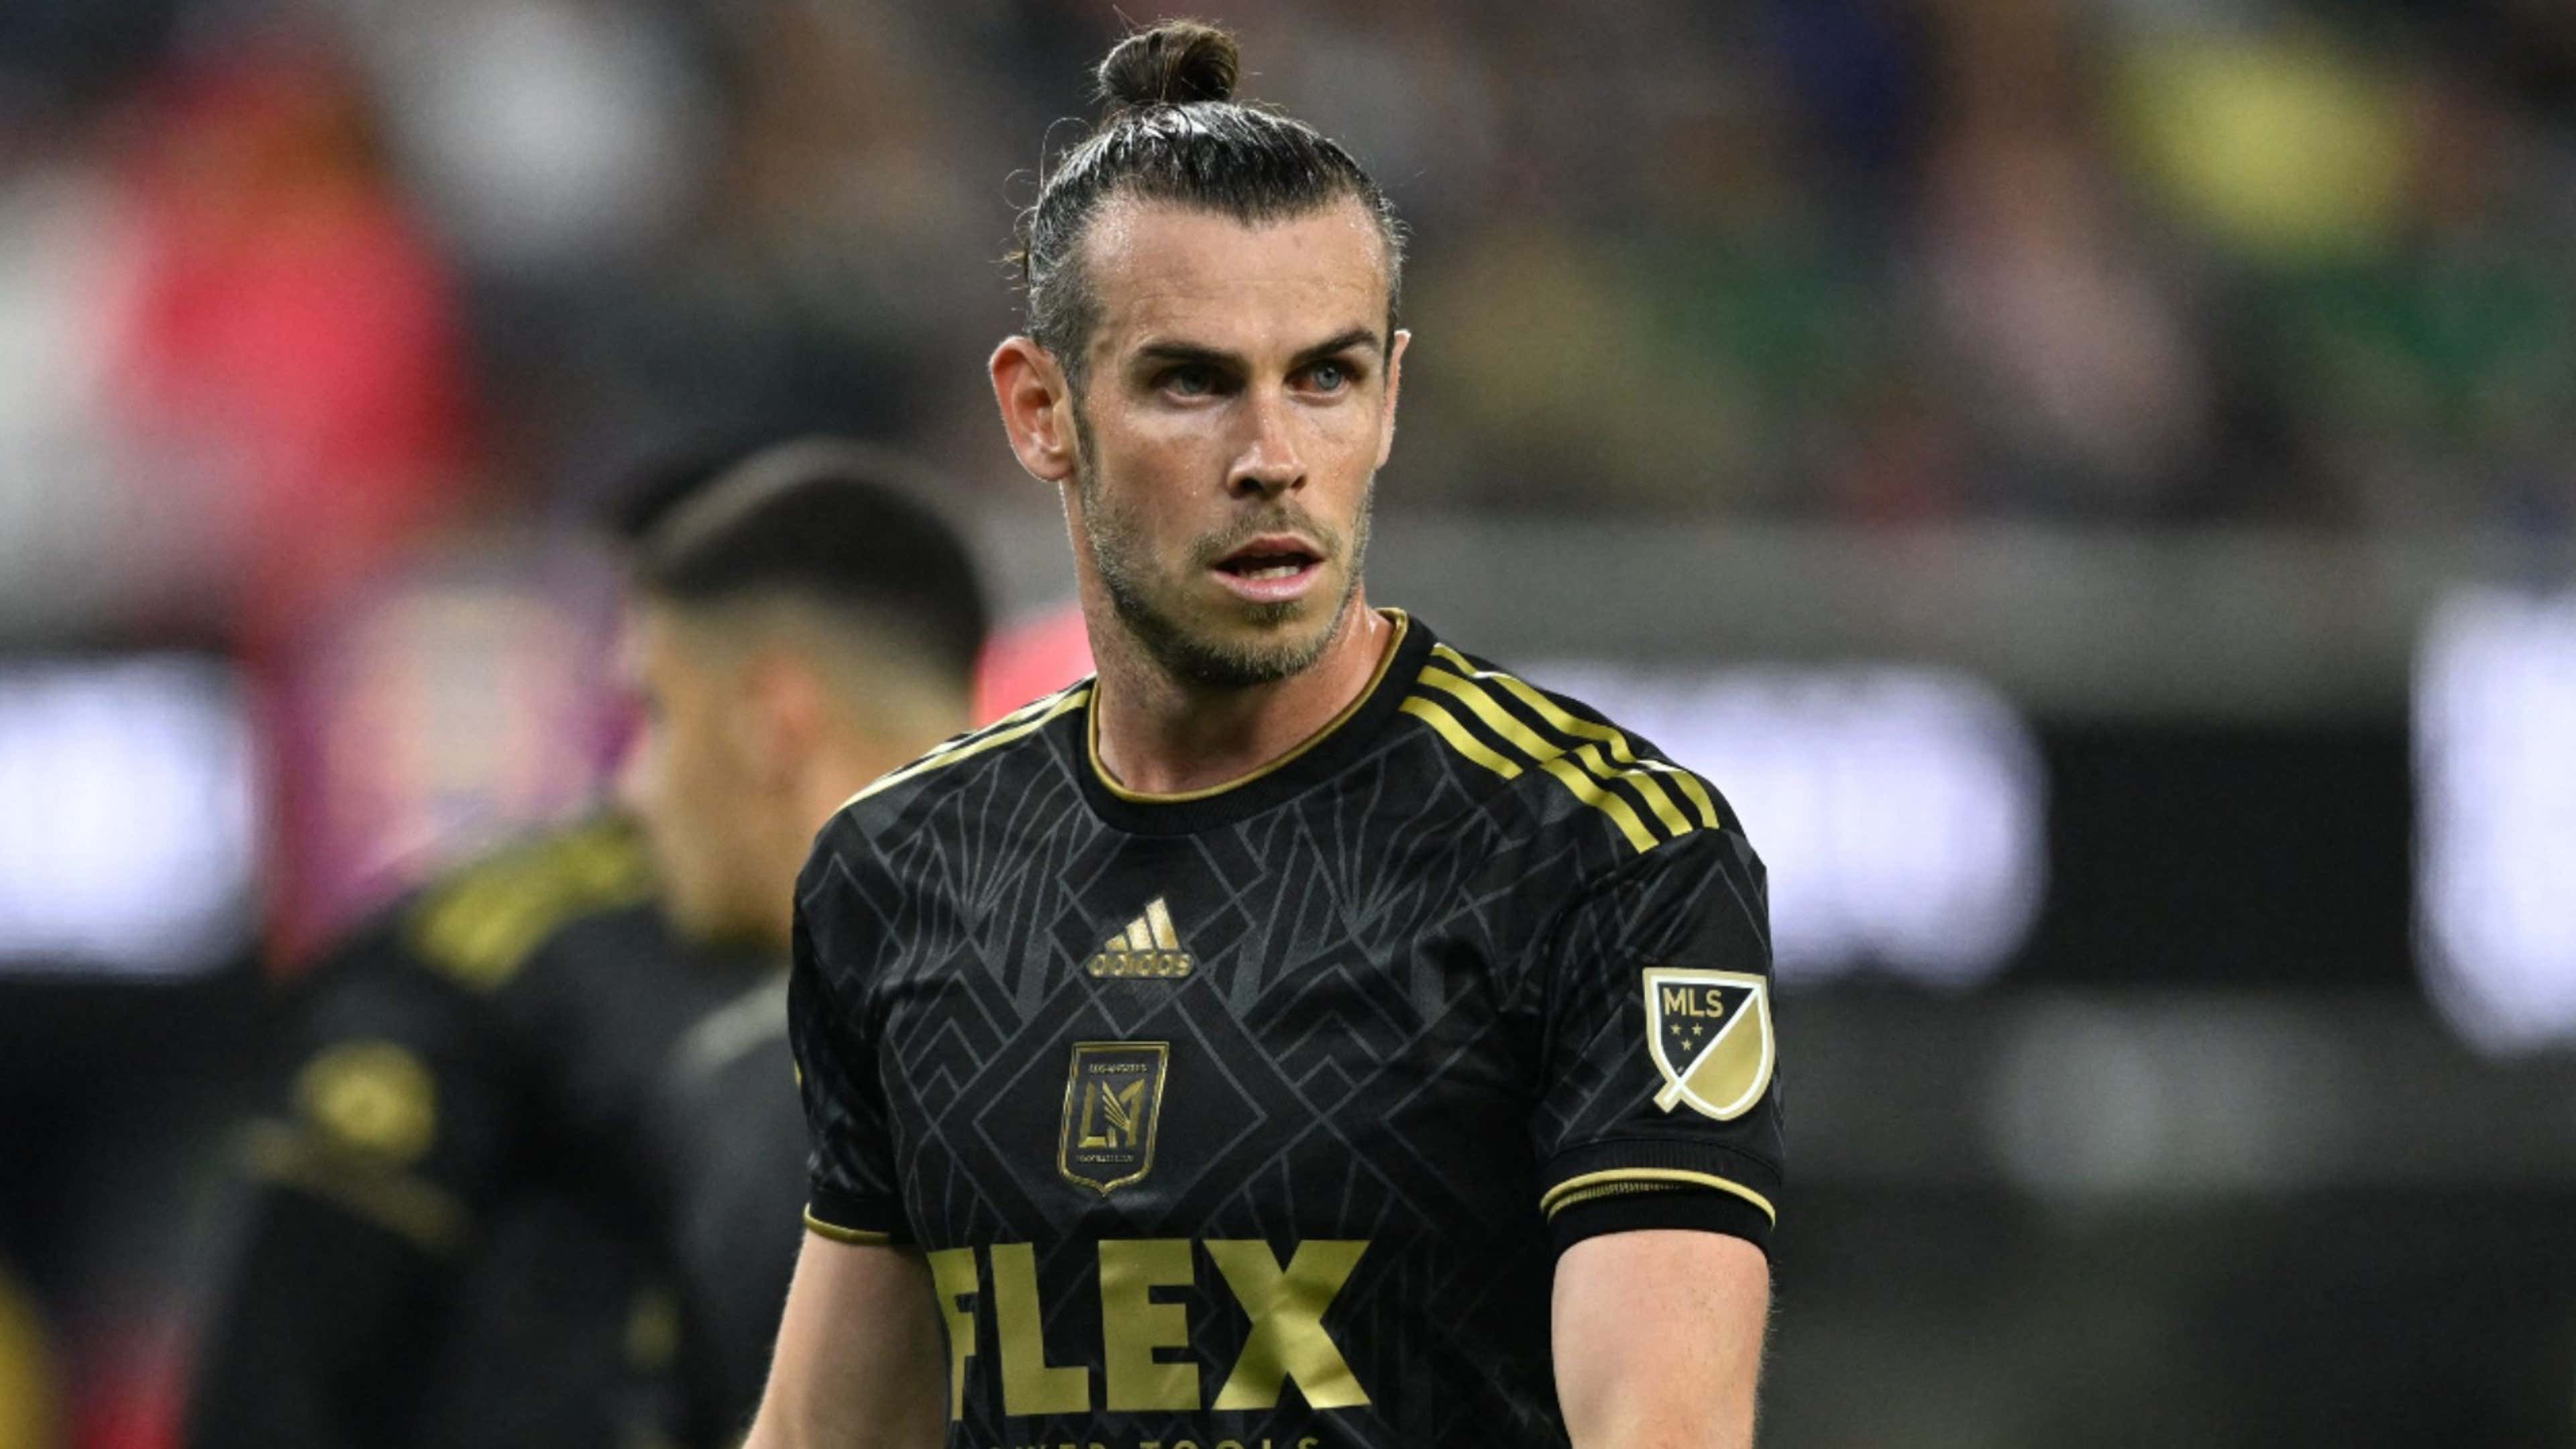 Why did Gareth Bale sign with LAFC? Former Champions League hero